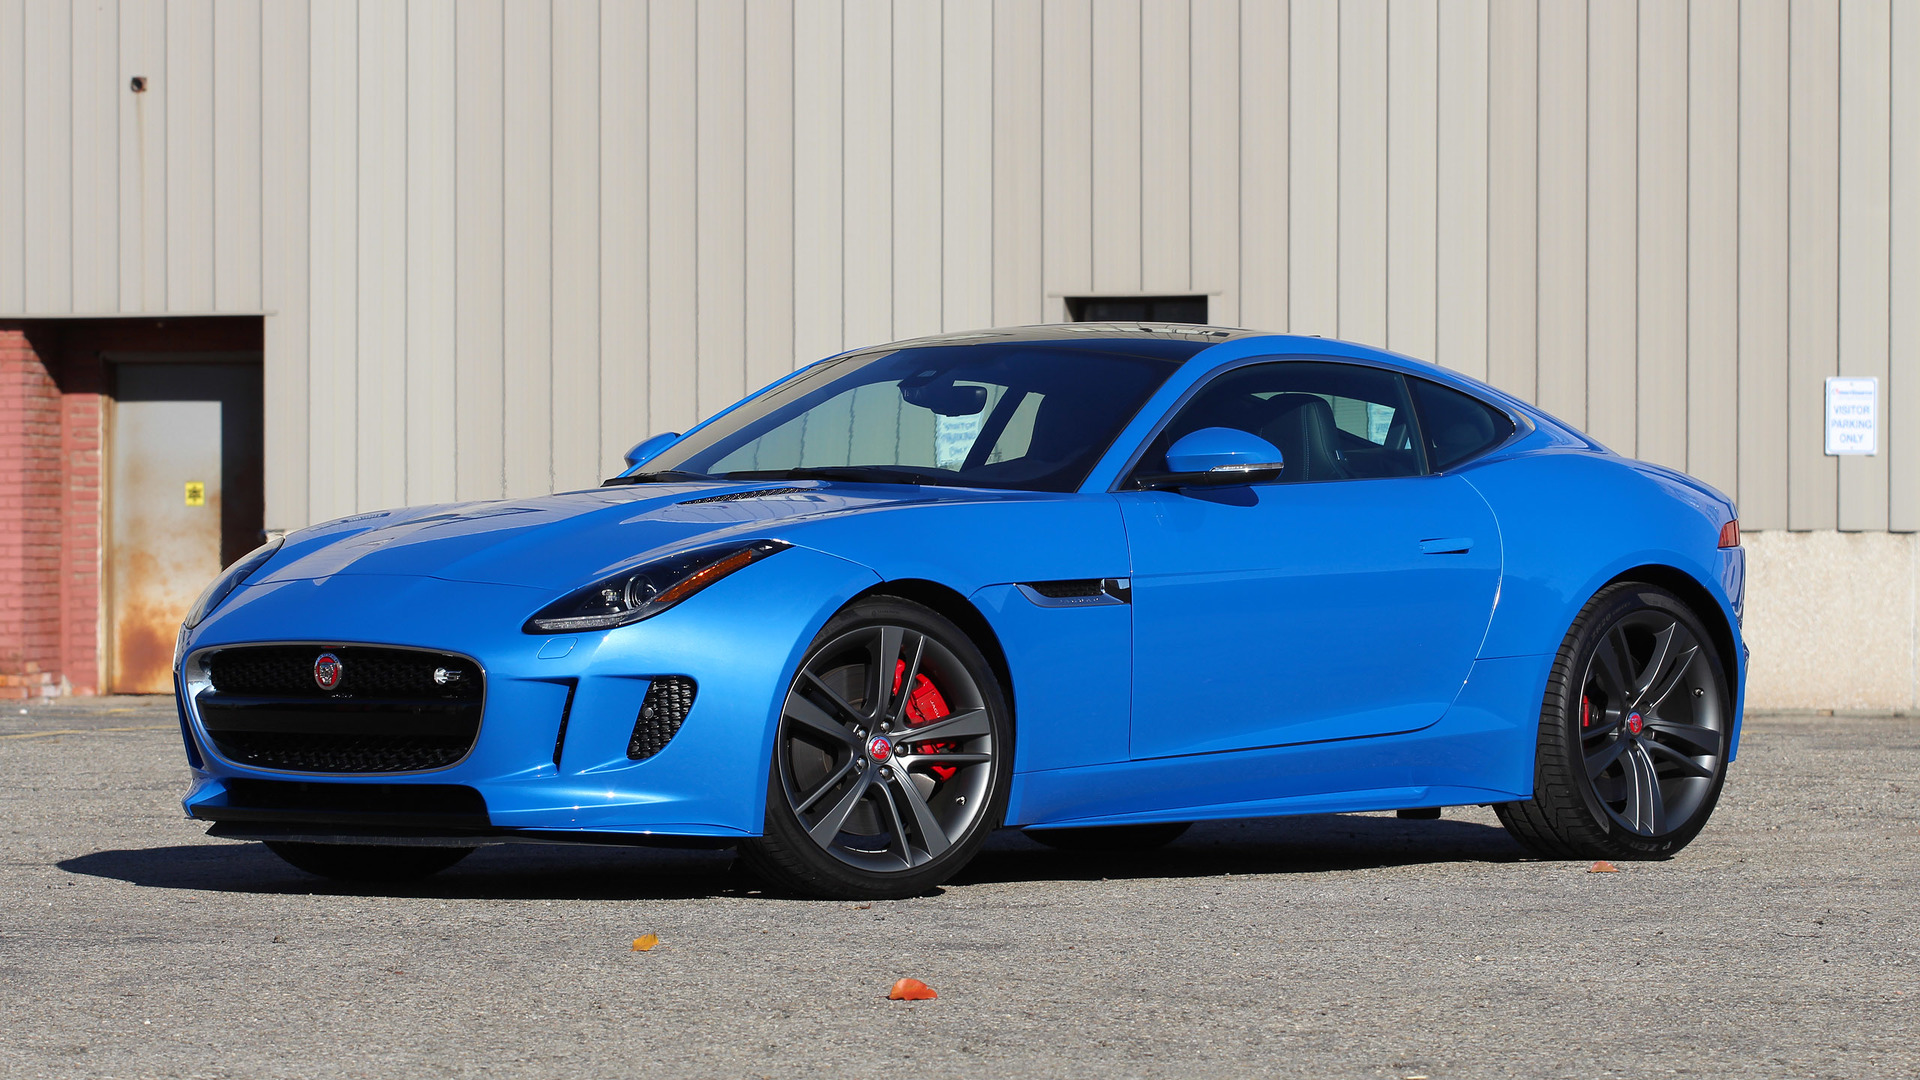 2017 Jaguar F-Type Coupe Review: Long live the F-Type